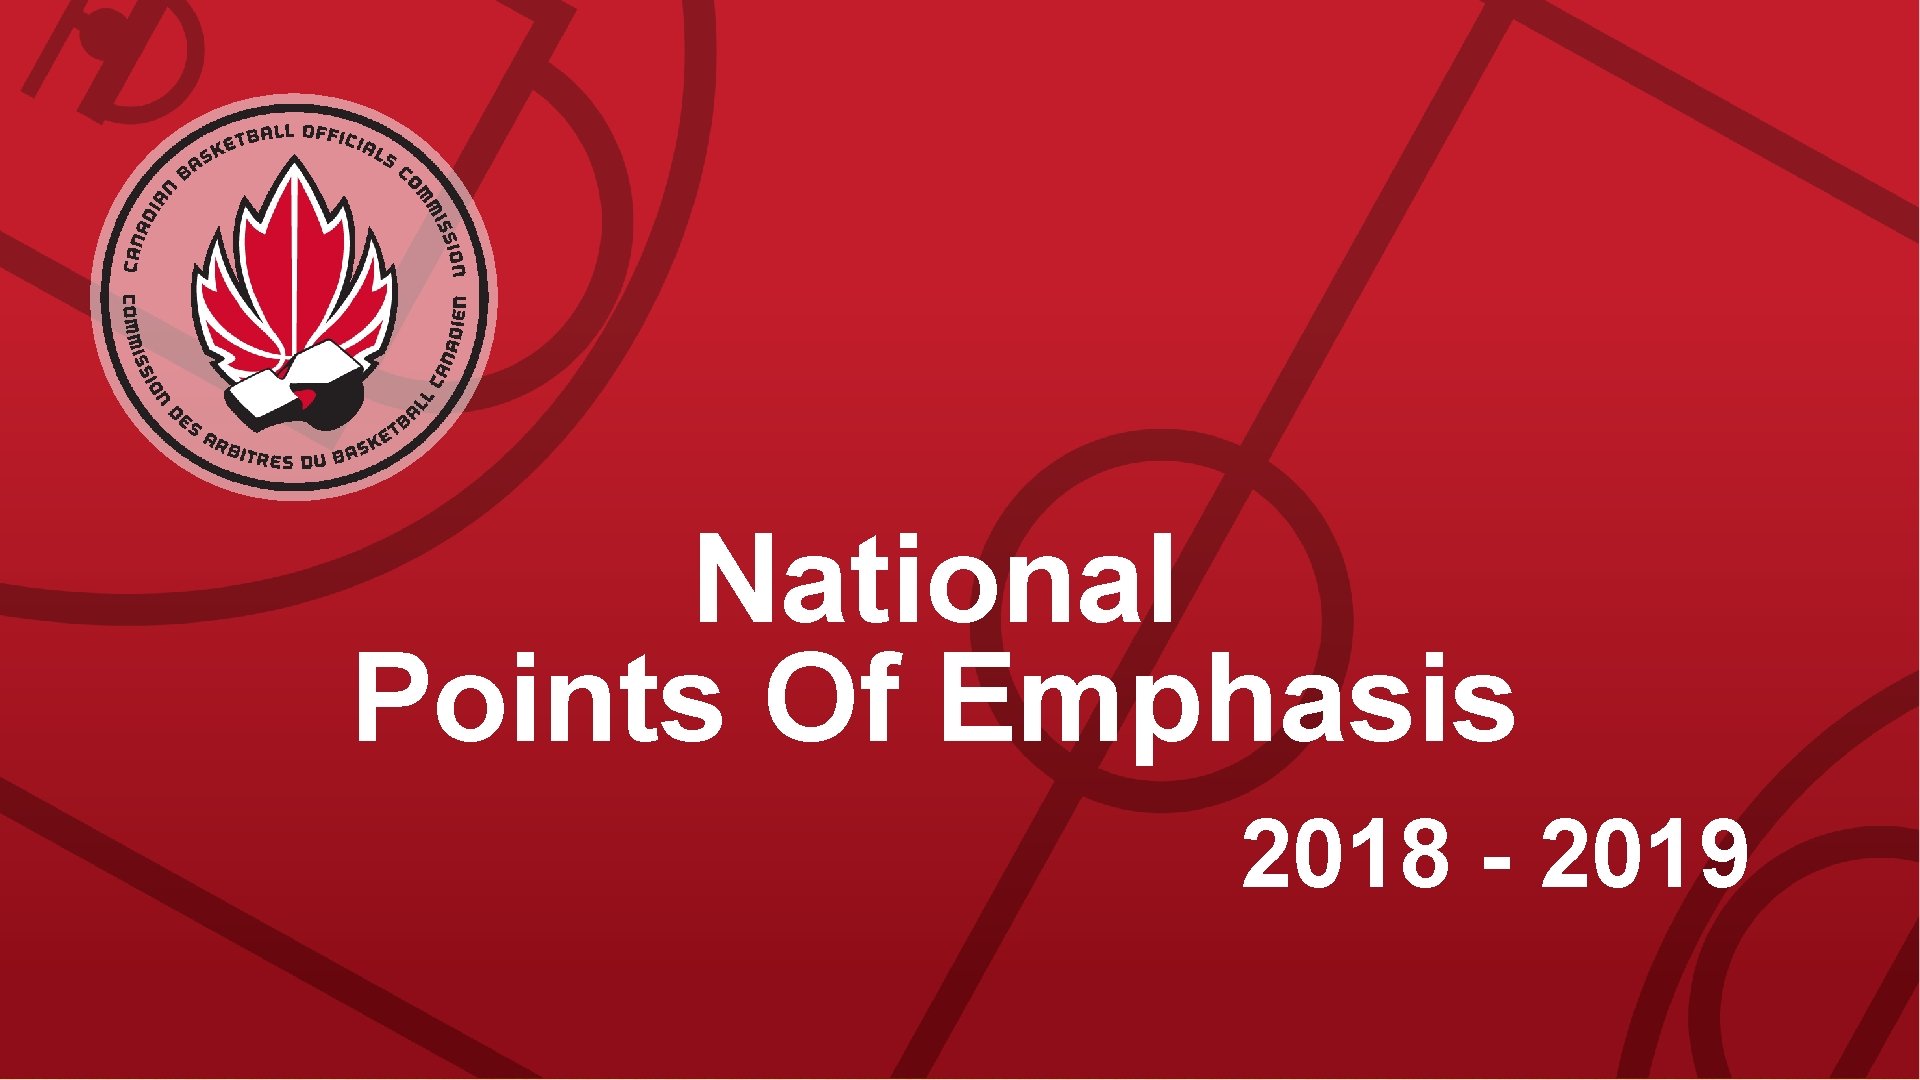 National Points Of Emphasis 2018 - 2019 